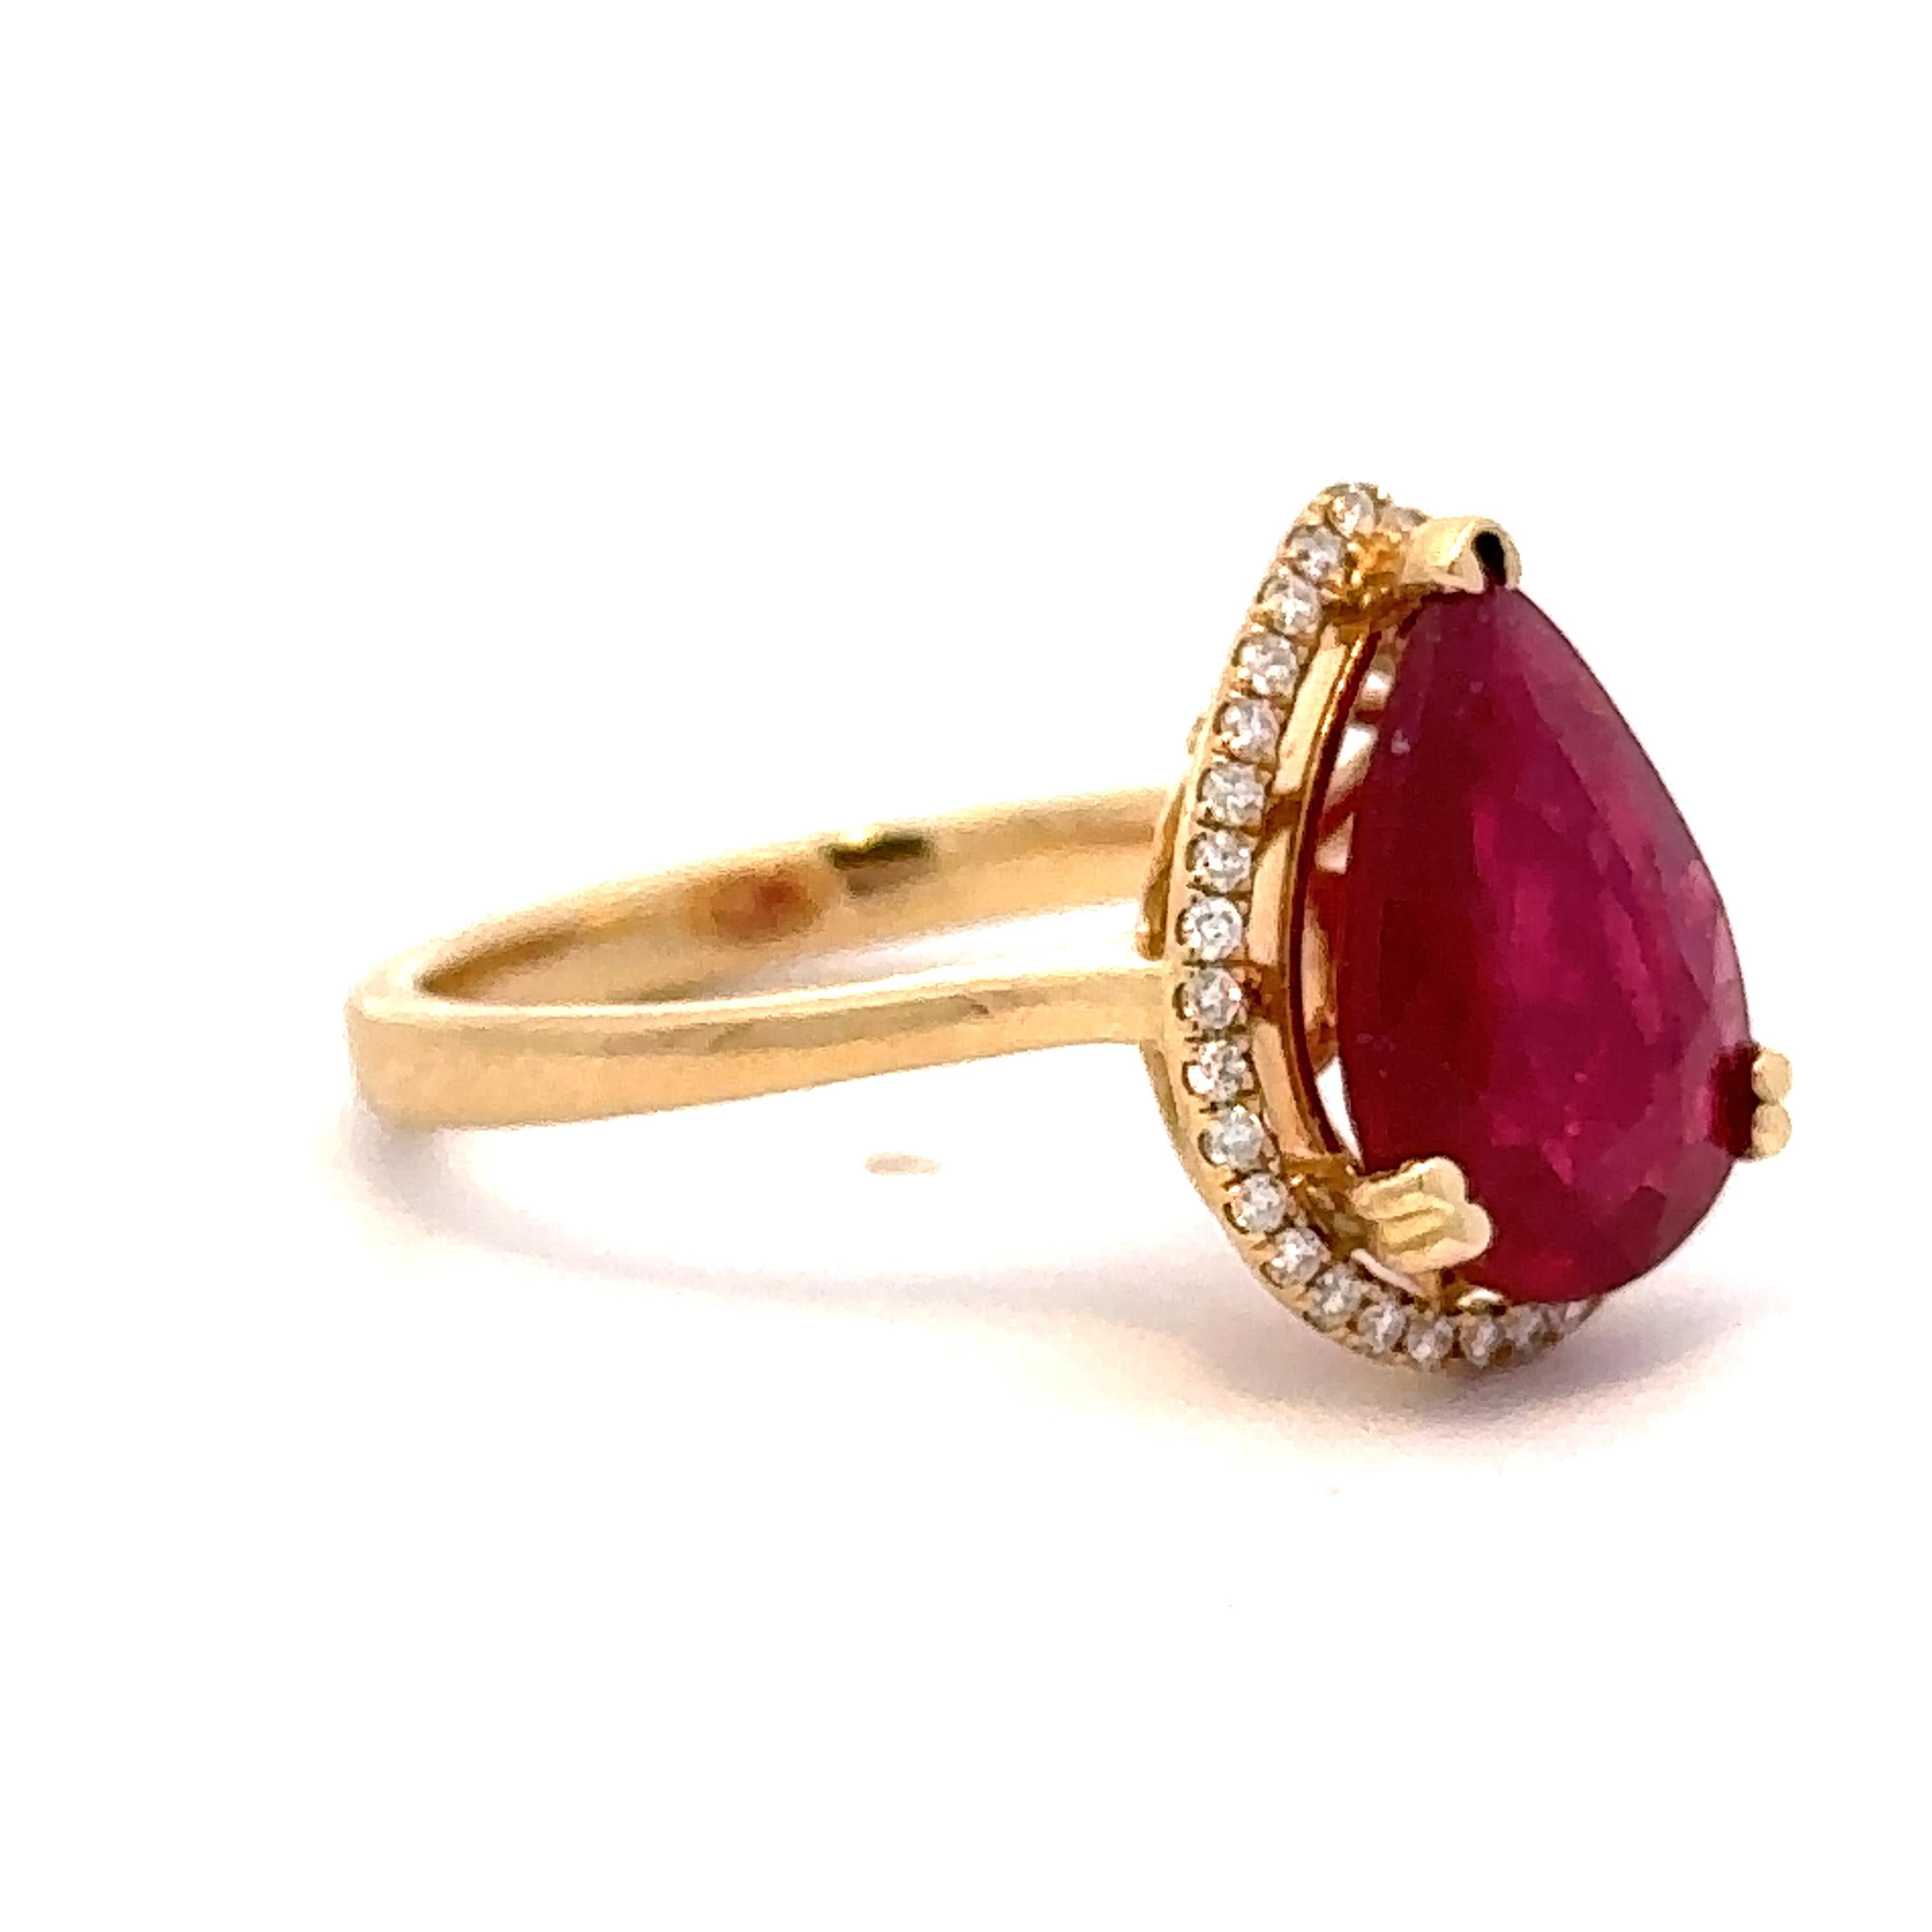 A lovely 14k yellow gold ring presenting a beautiful pear shaped ruby from the mines of Mozambique set within a halo of diamonds. The stone weighs approximately 2.75 carats and is glass fracture filled. The ring is a size 6.5, but can easily be